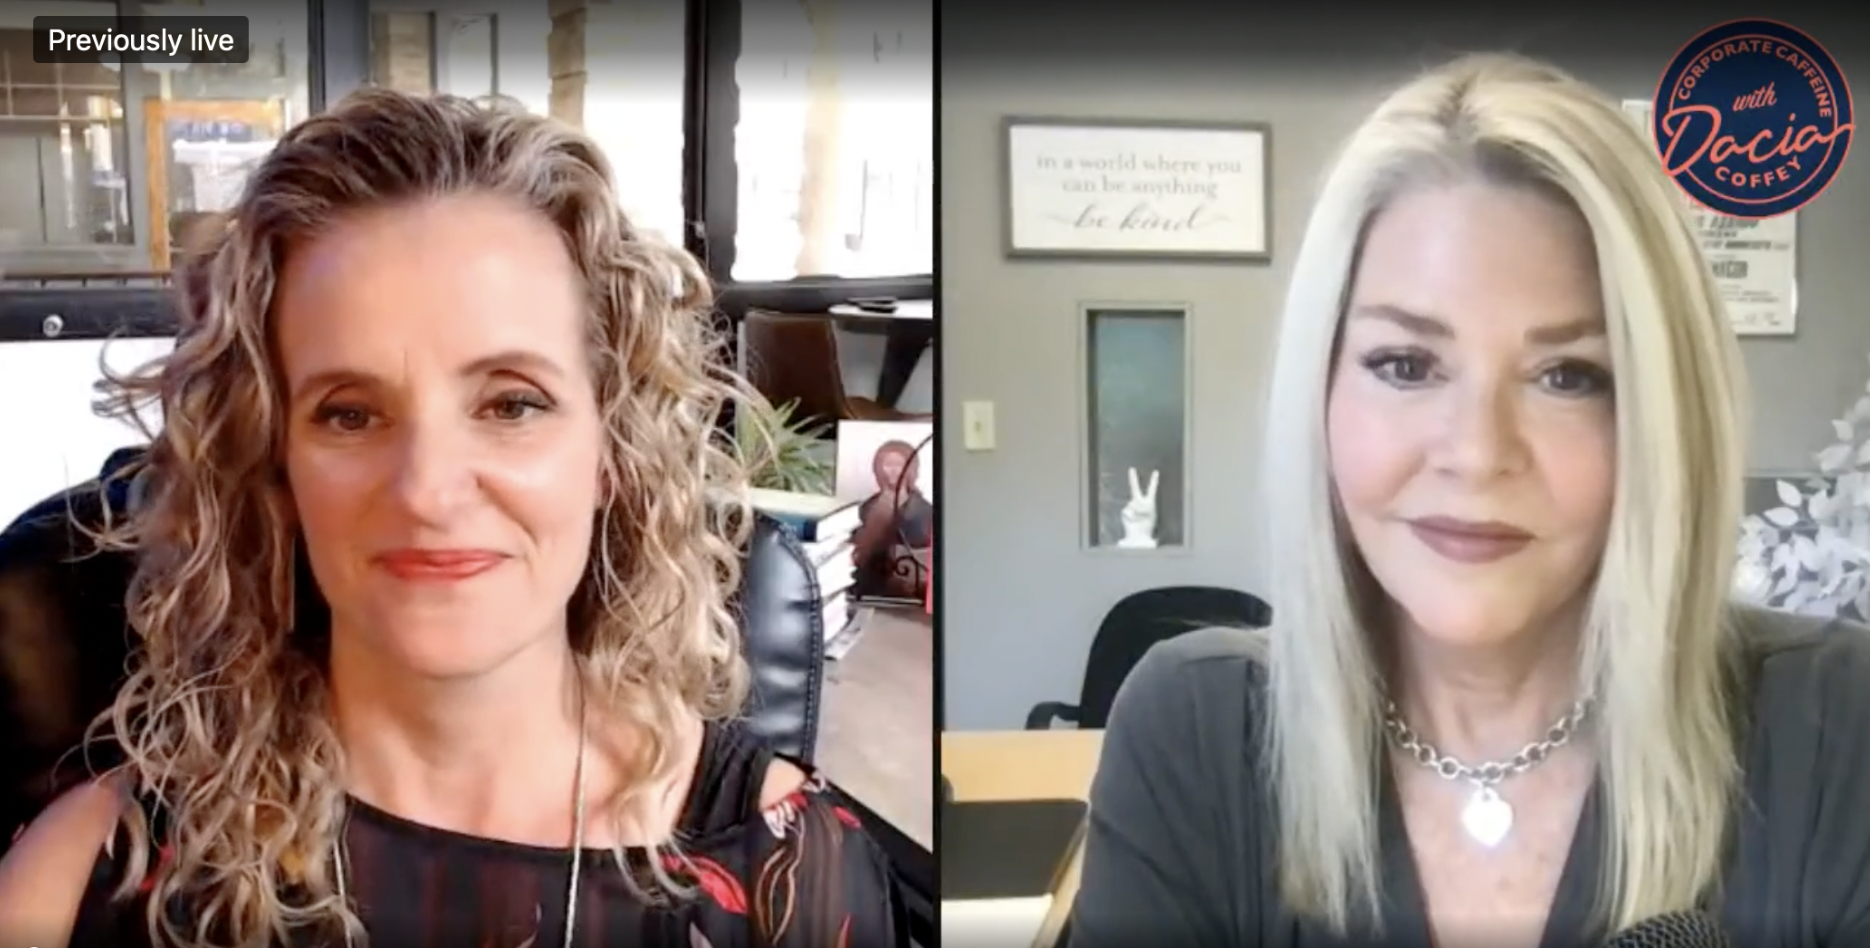 Kitty Hart & Dacia Coffey Dive Into Experiential Marketing on Corporate Caffeine